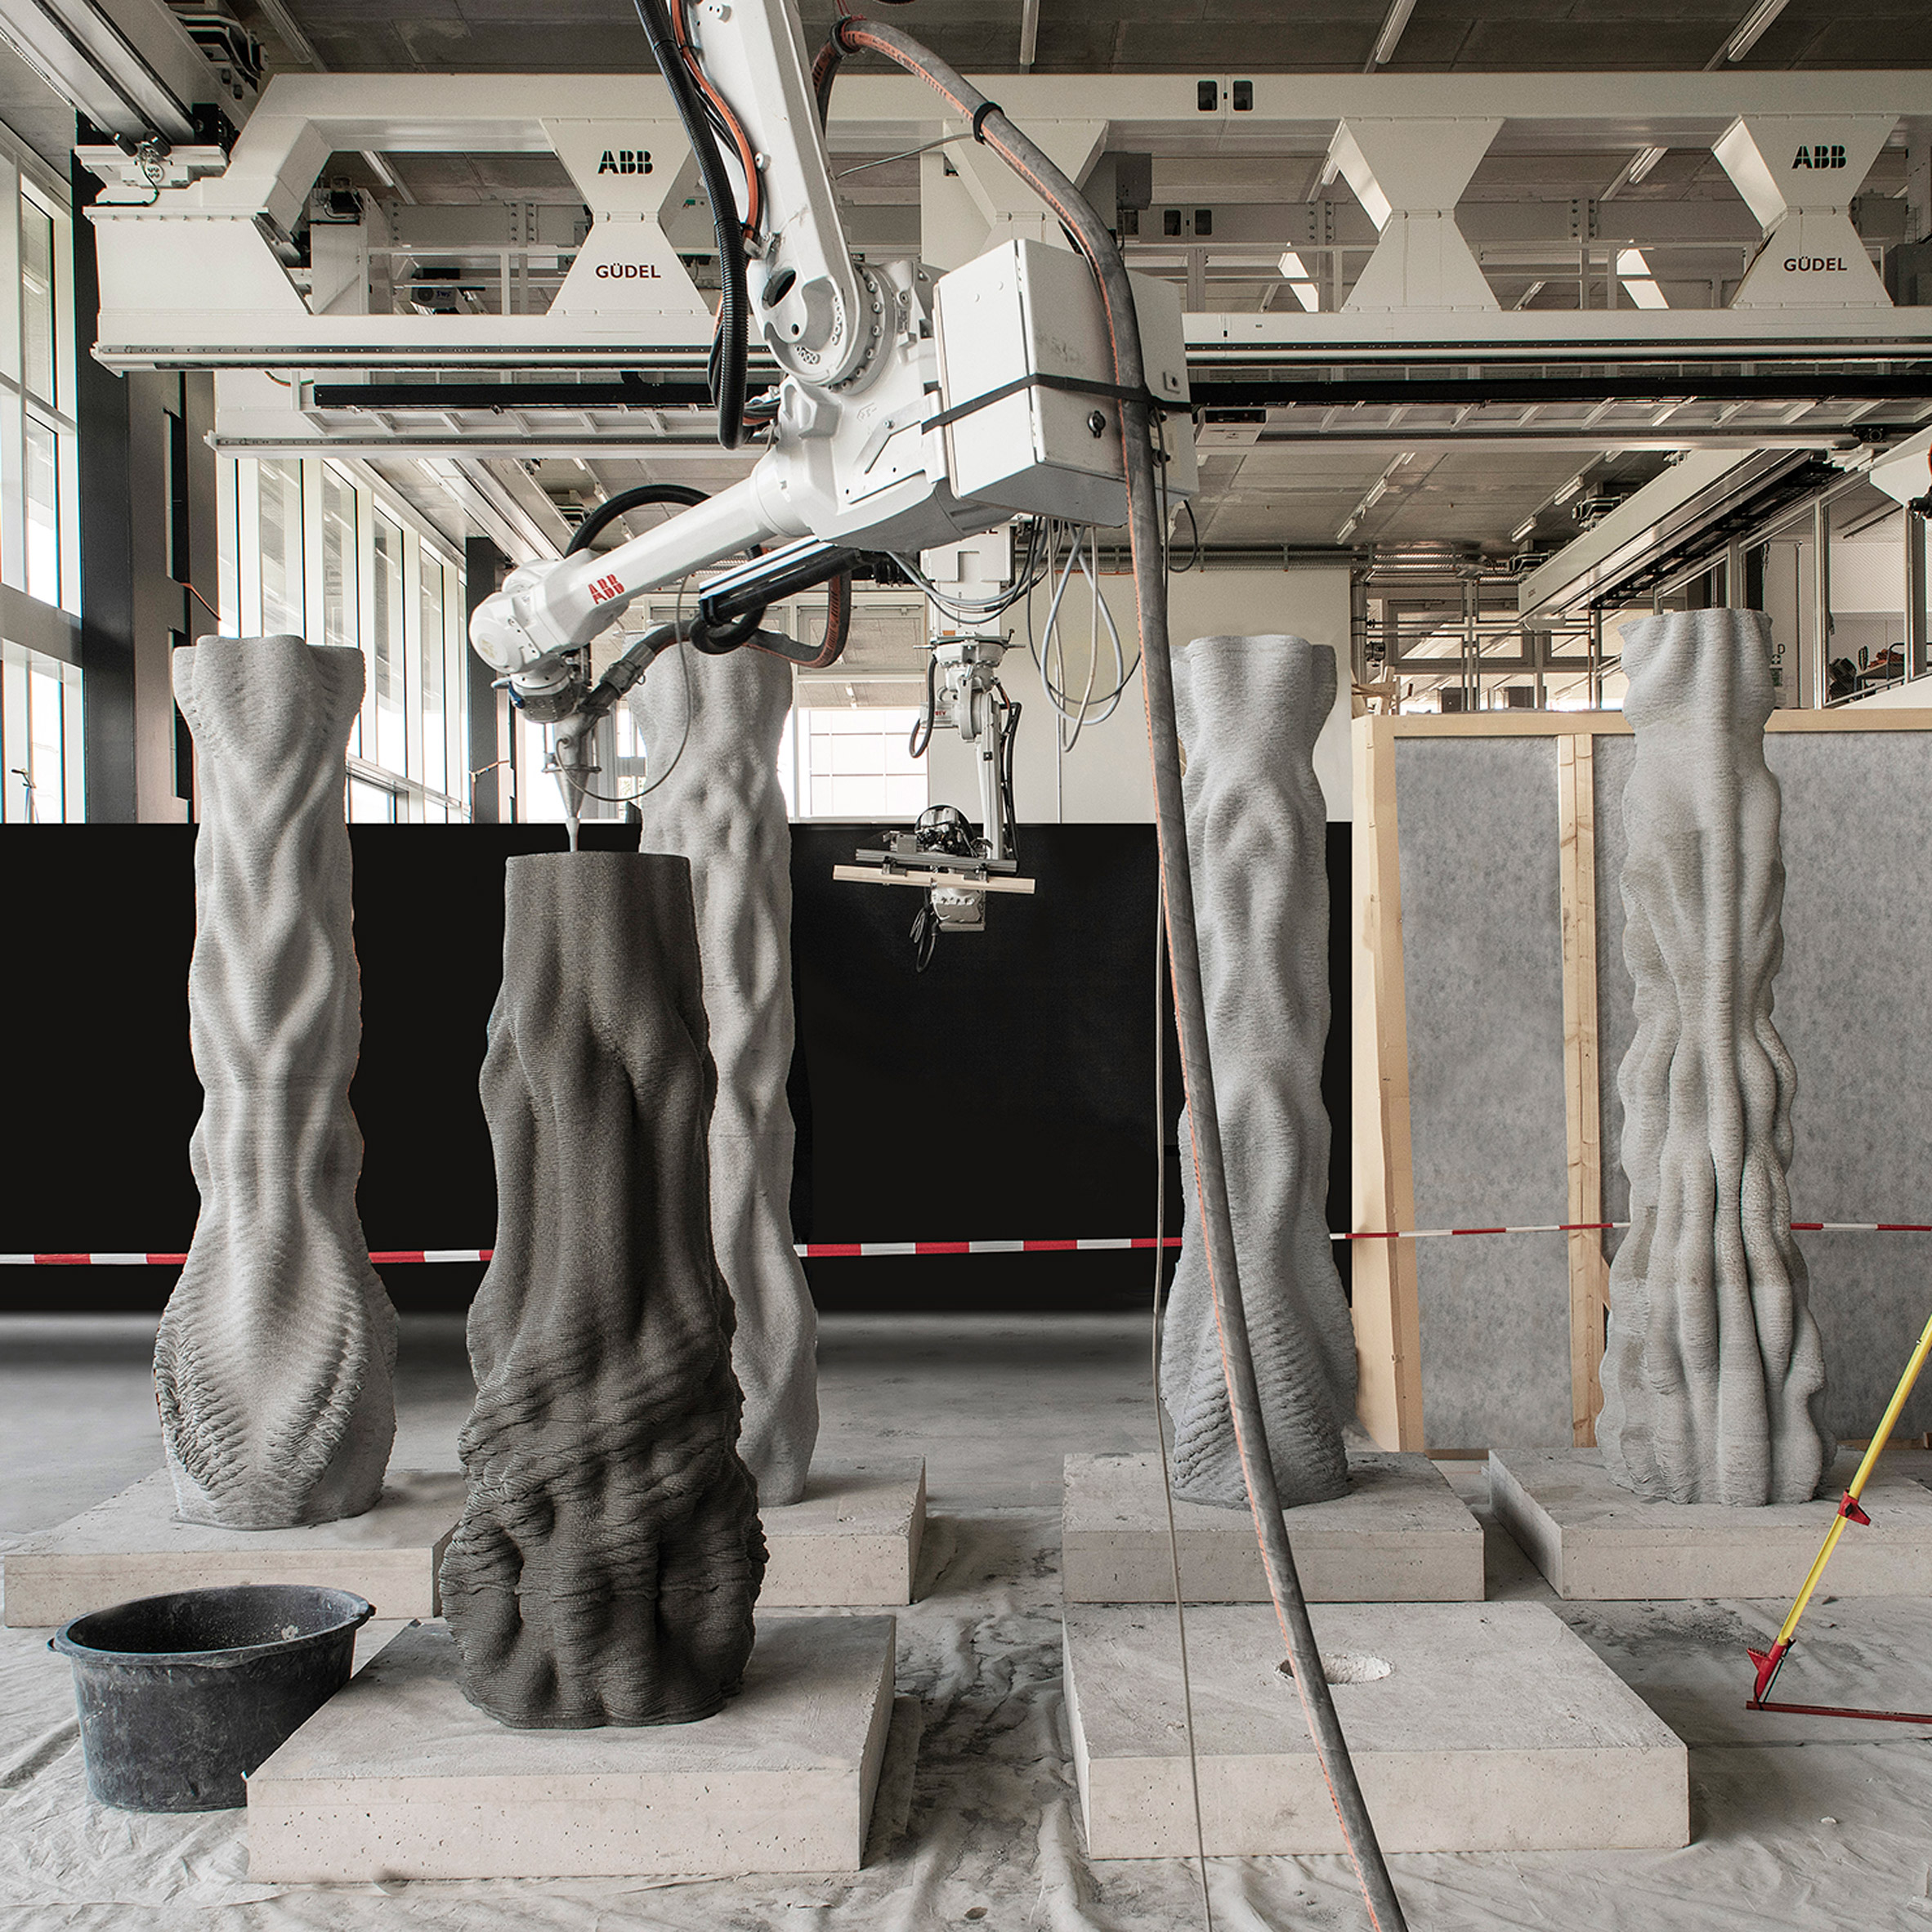 Students' Concrete Choreography pillars provide a stage